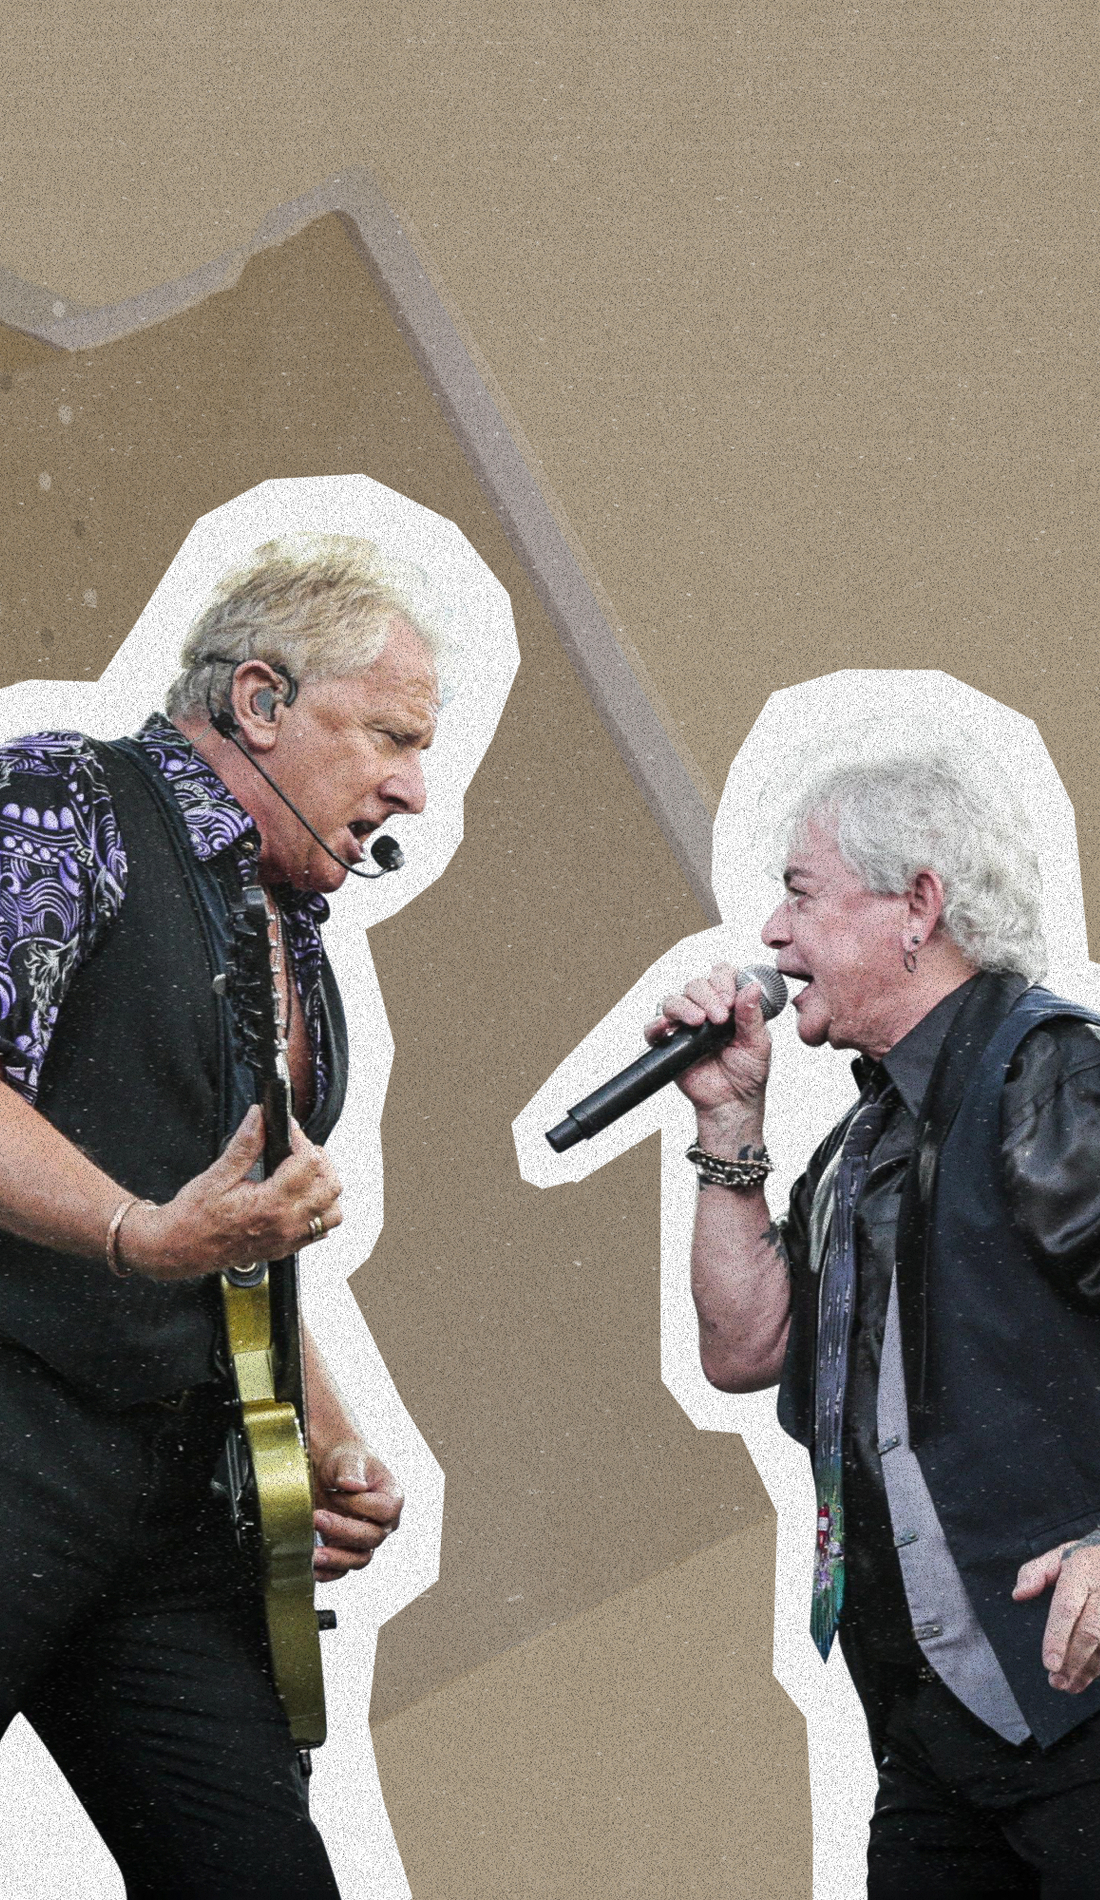 A Air Supply live event